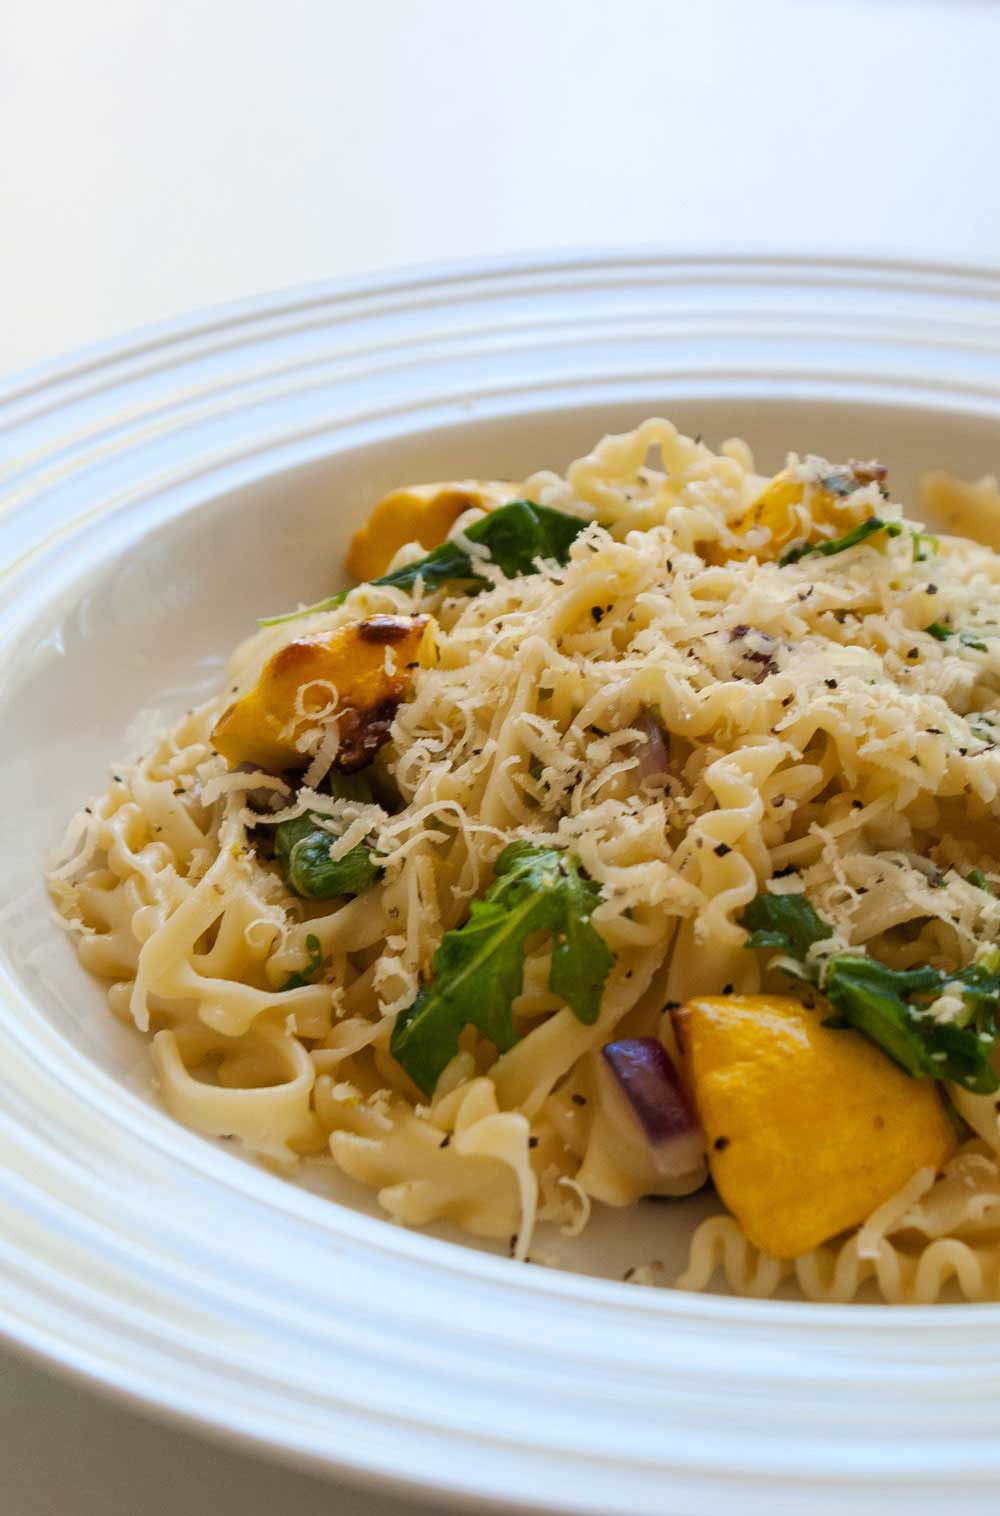 Pasta with Rocket and Roasted Squash. A light, vegetarian pasta dish that is full of fresh flavours.